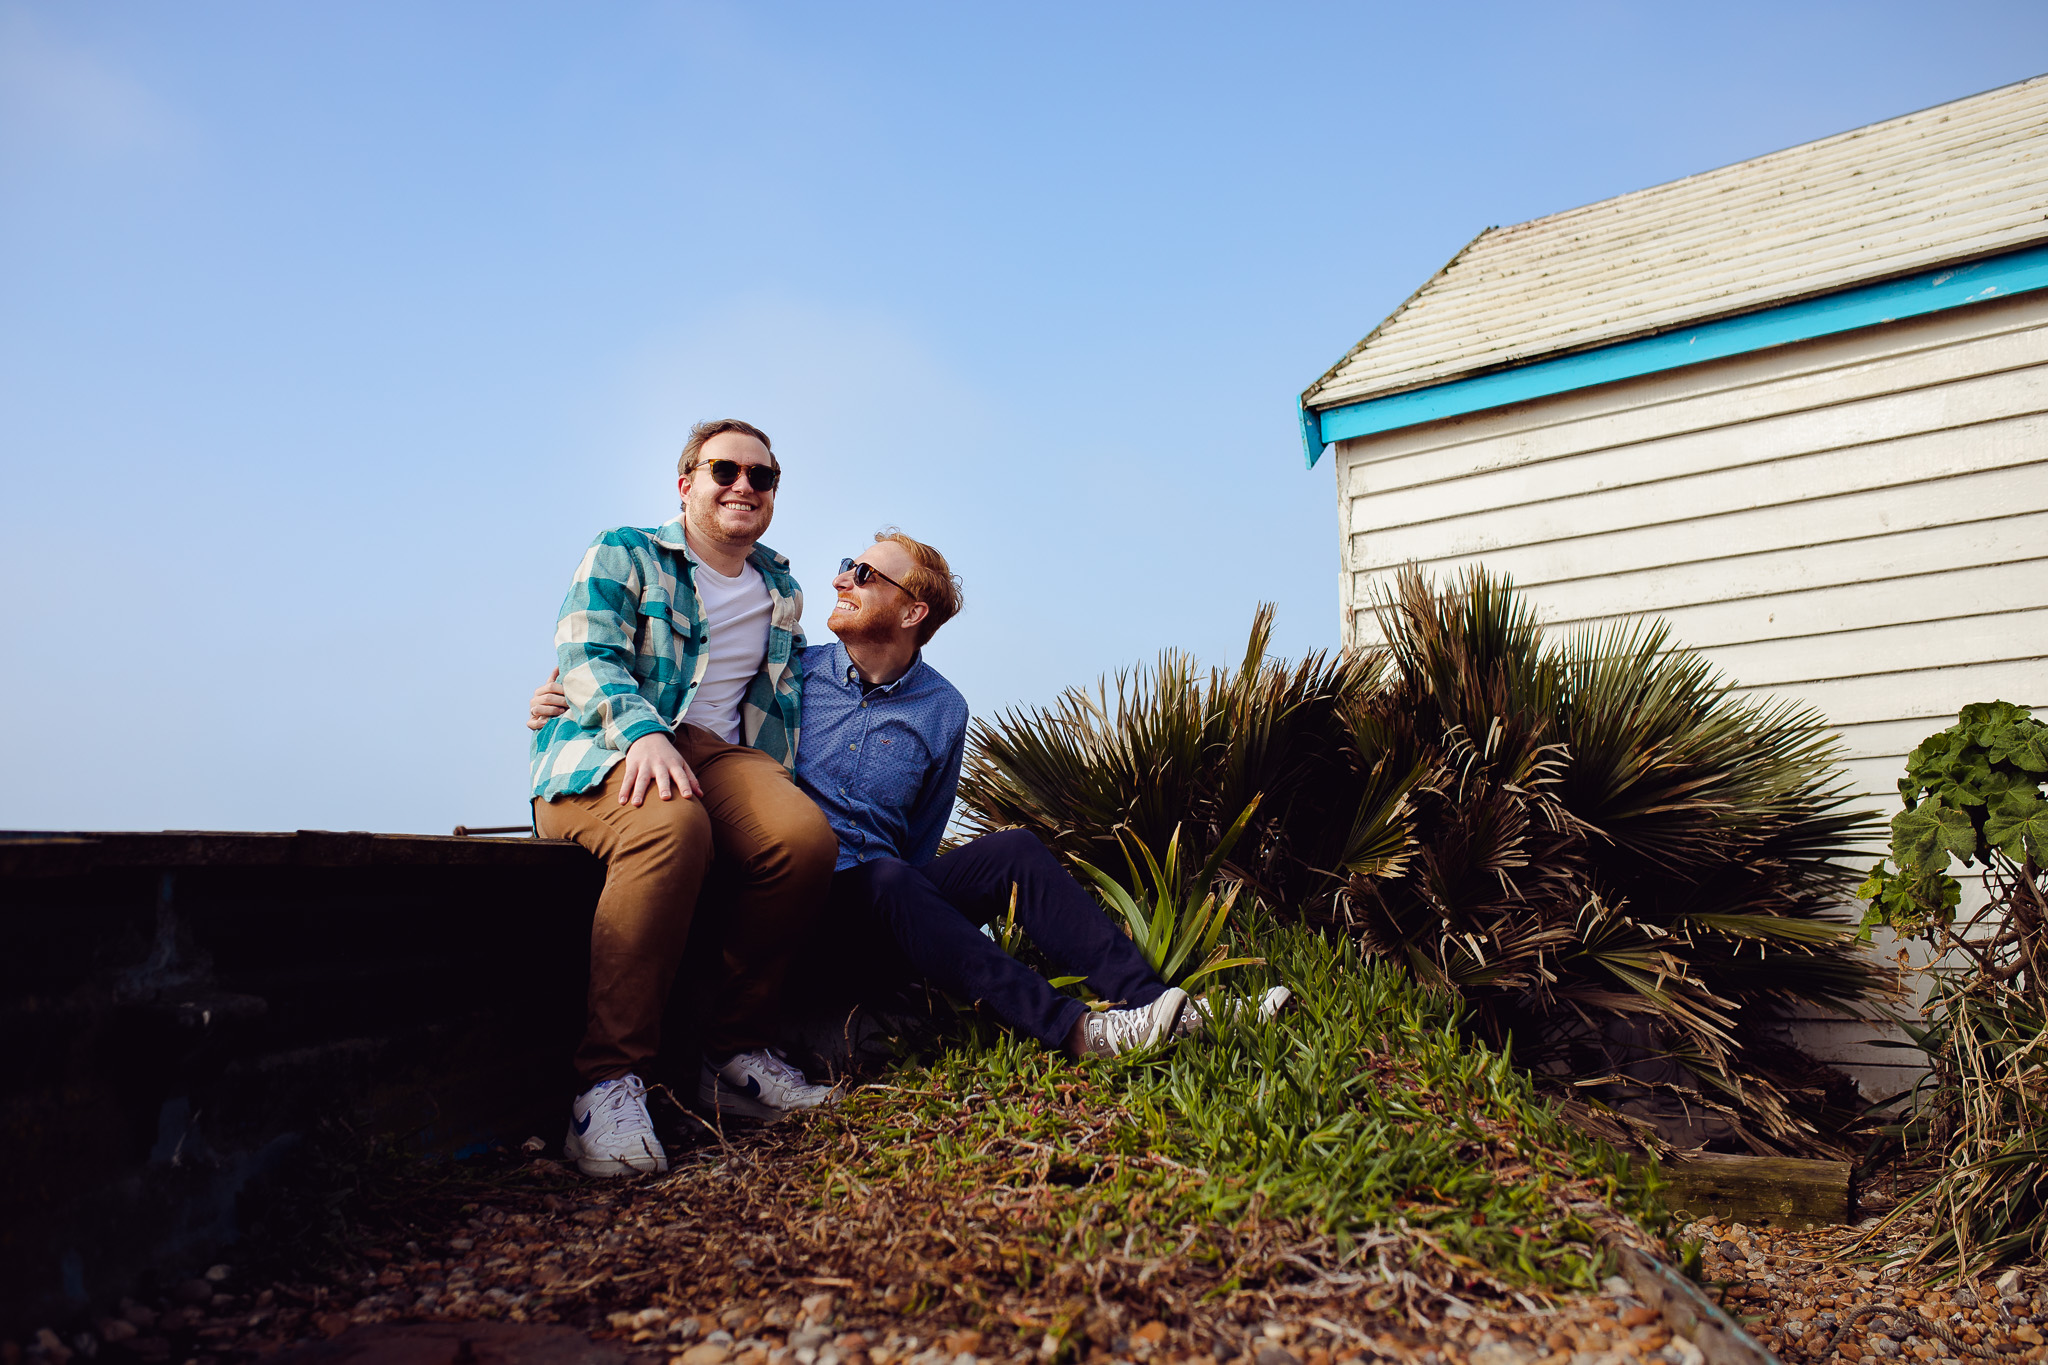 Engagement portrait of an LGBTQ+ couple wearing sunglasses and smiling sitting next to a beach hut